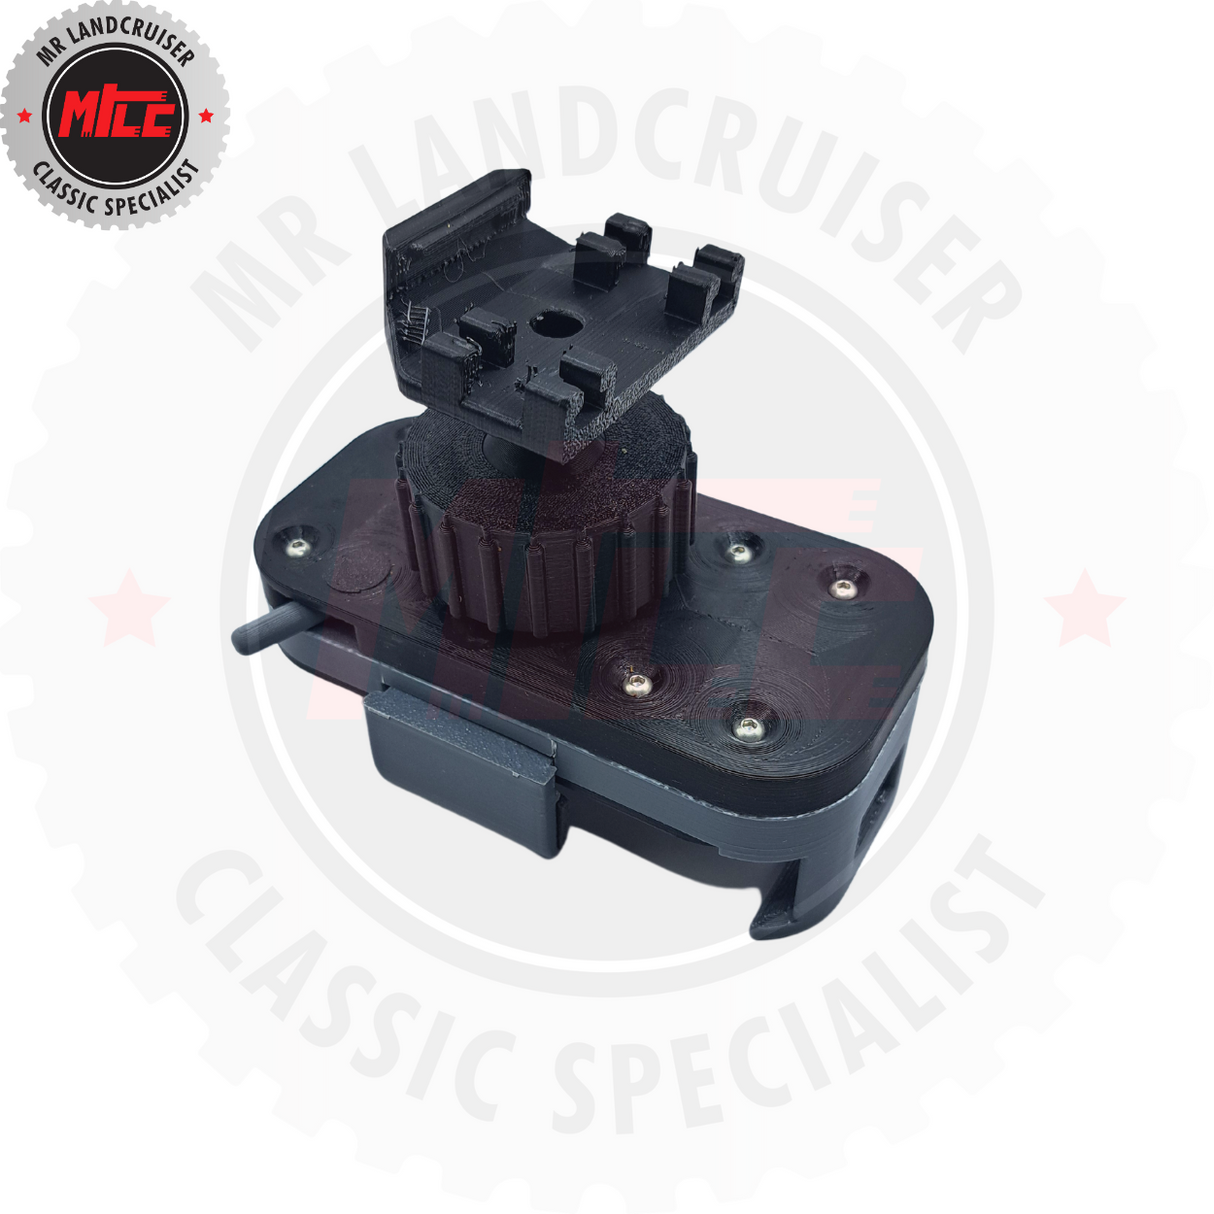 back mount view of Phone Holder & Dual Mic Holder Bracket for Toyota Landcruiser 40 series 60 series and 70 series